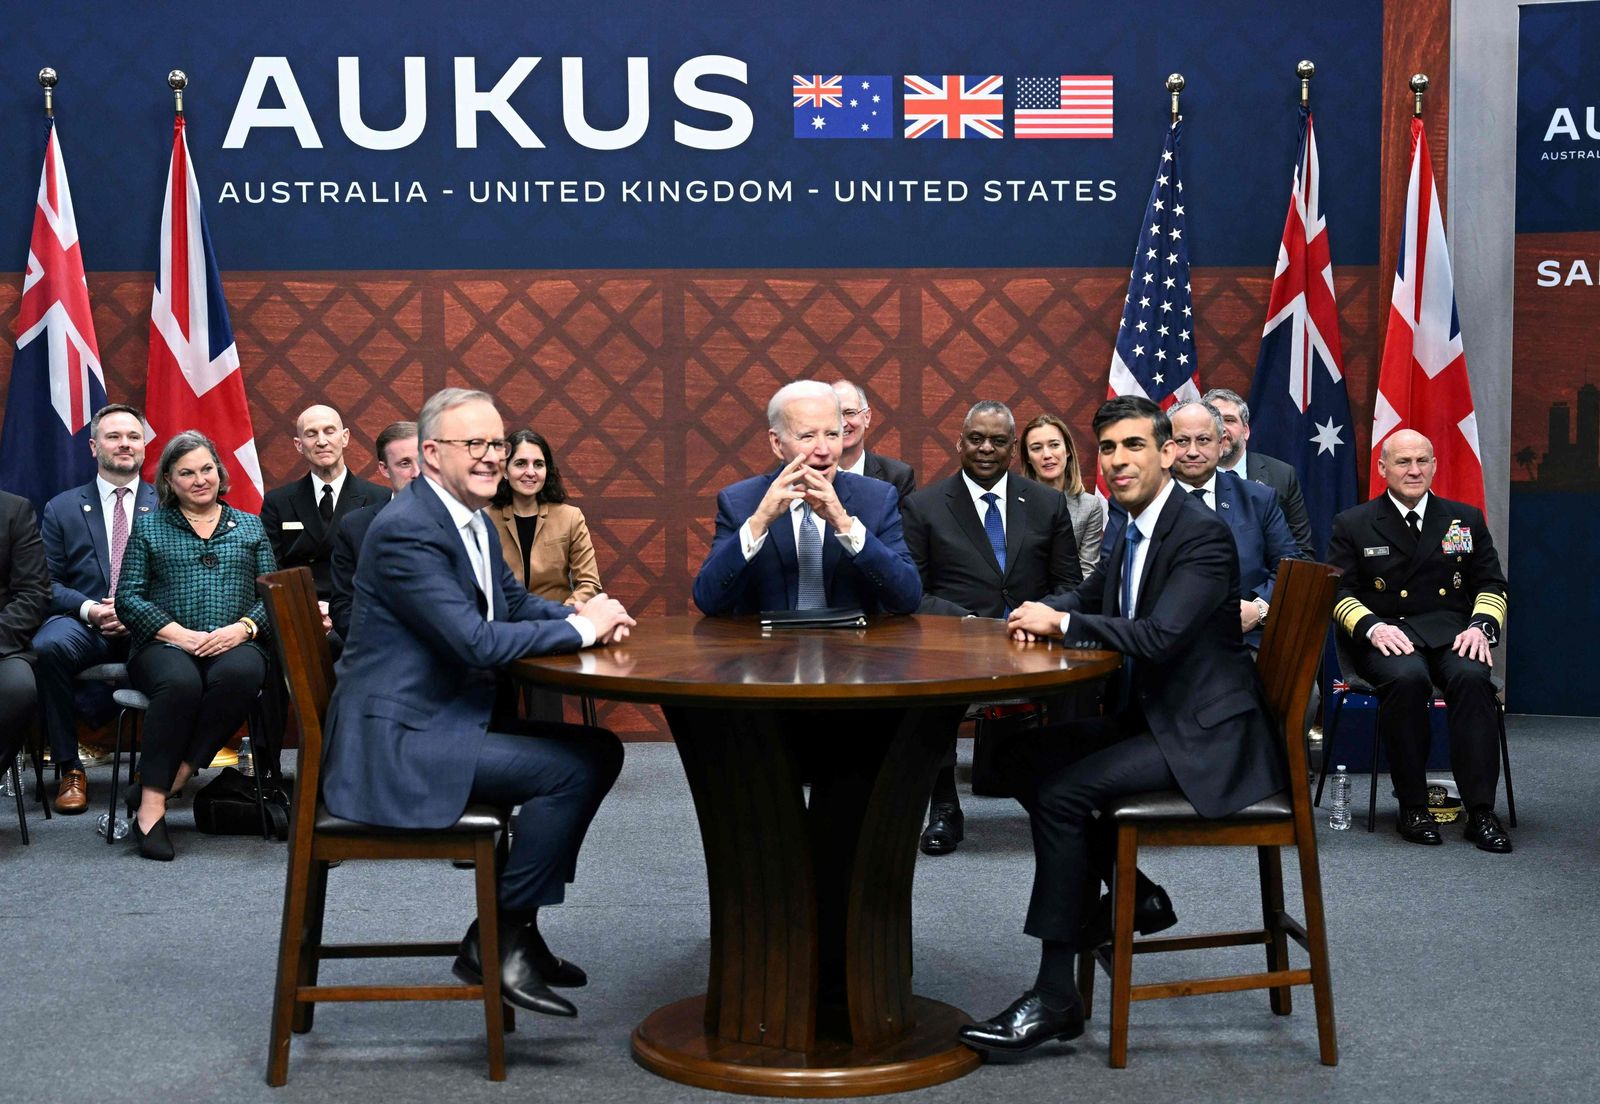 US President Joe Biden (C) participates in a trilateral meeting with British Prime Minister Rishi Sunak (R) and Australia's Prime Minister Anthony Albanese (L) during the AUKUS summit on March 13, 2023, at Naval Base Point Loma in San Diego California. - AUKUS is a trilateral security pact announced on September 15, 2021, for the Indo-Pacific region. (Photo by Jim WATSON / AFP) - AFP